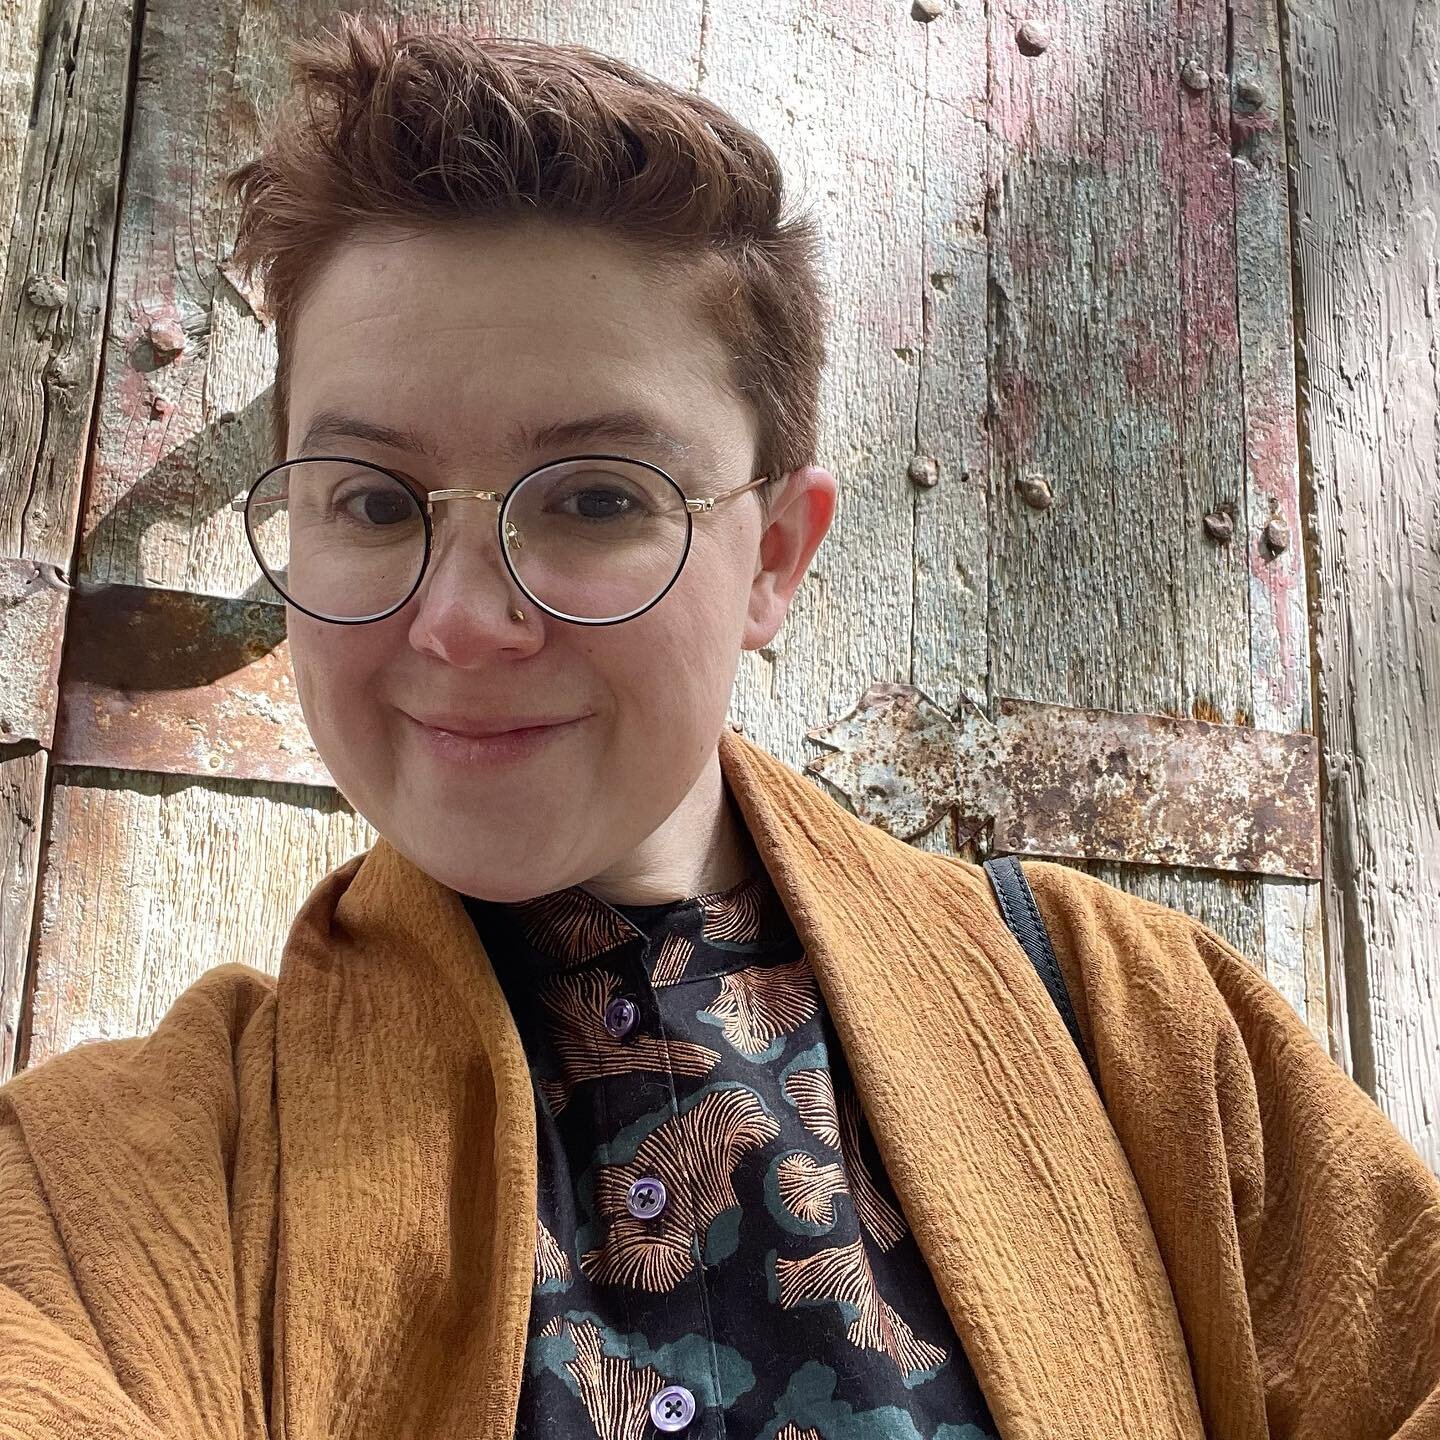 Awkward on-the-way-out selfie to show off this PRINT. 🍄
.
.
.
{Description: Lizzy, a white person with glasses and short messy hair, smiles in front of a wooden door. She is wearing a grandpa collar shirt with a print of chanterelle mushrooms in bla